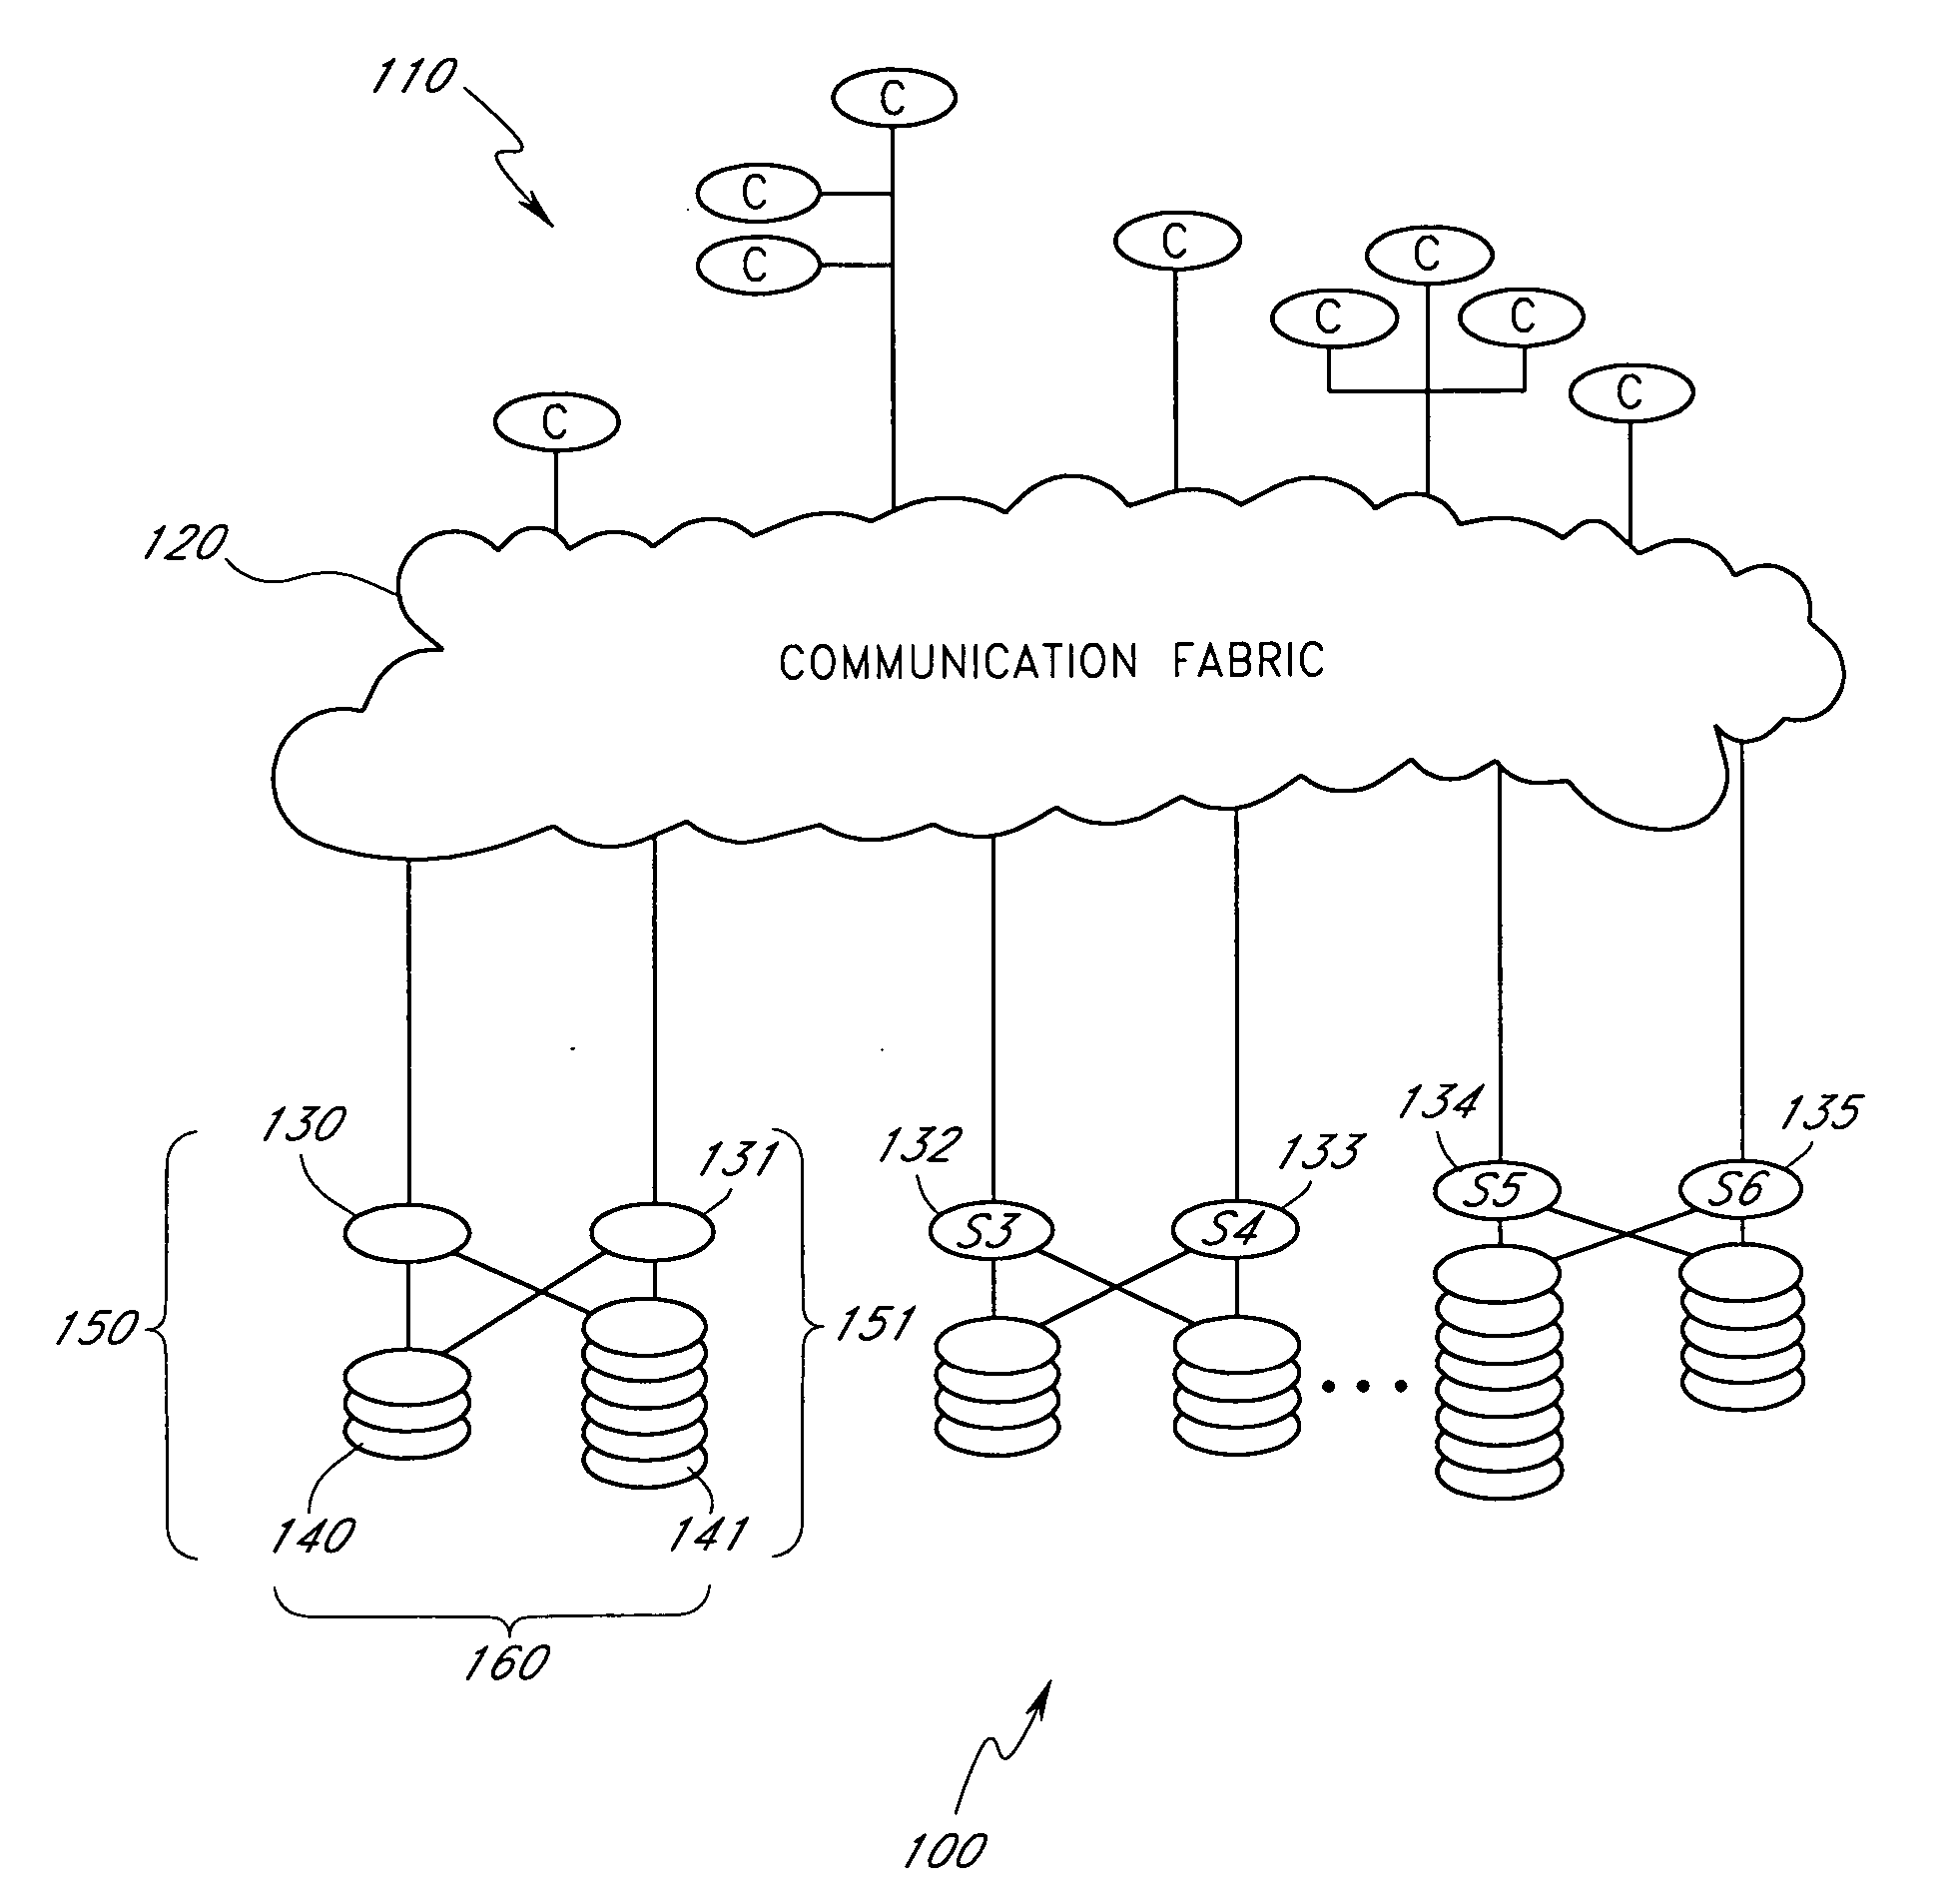 Directory information for managing data in network file system